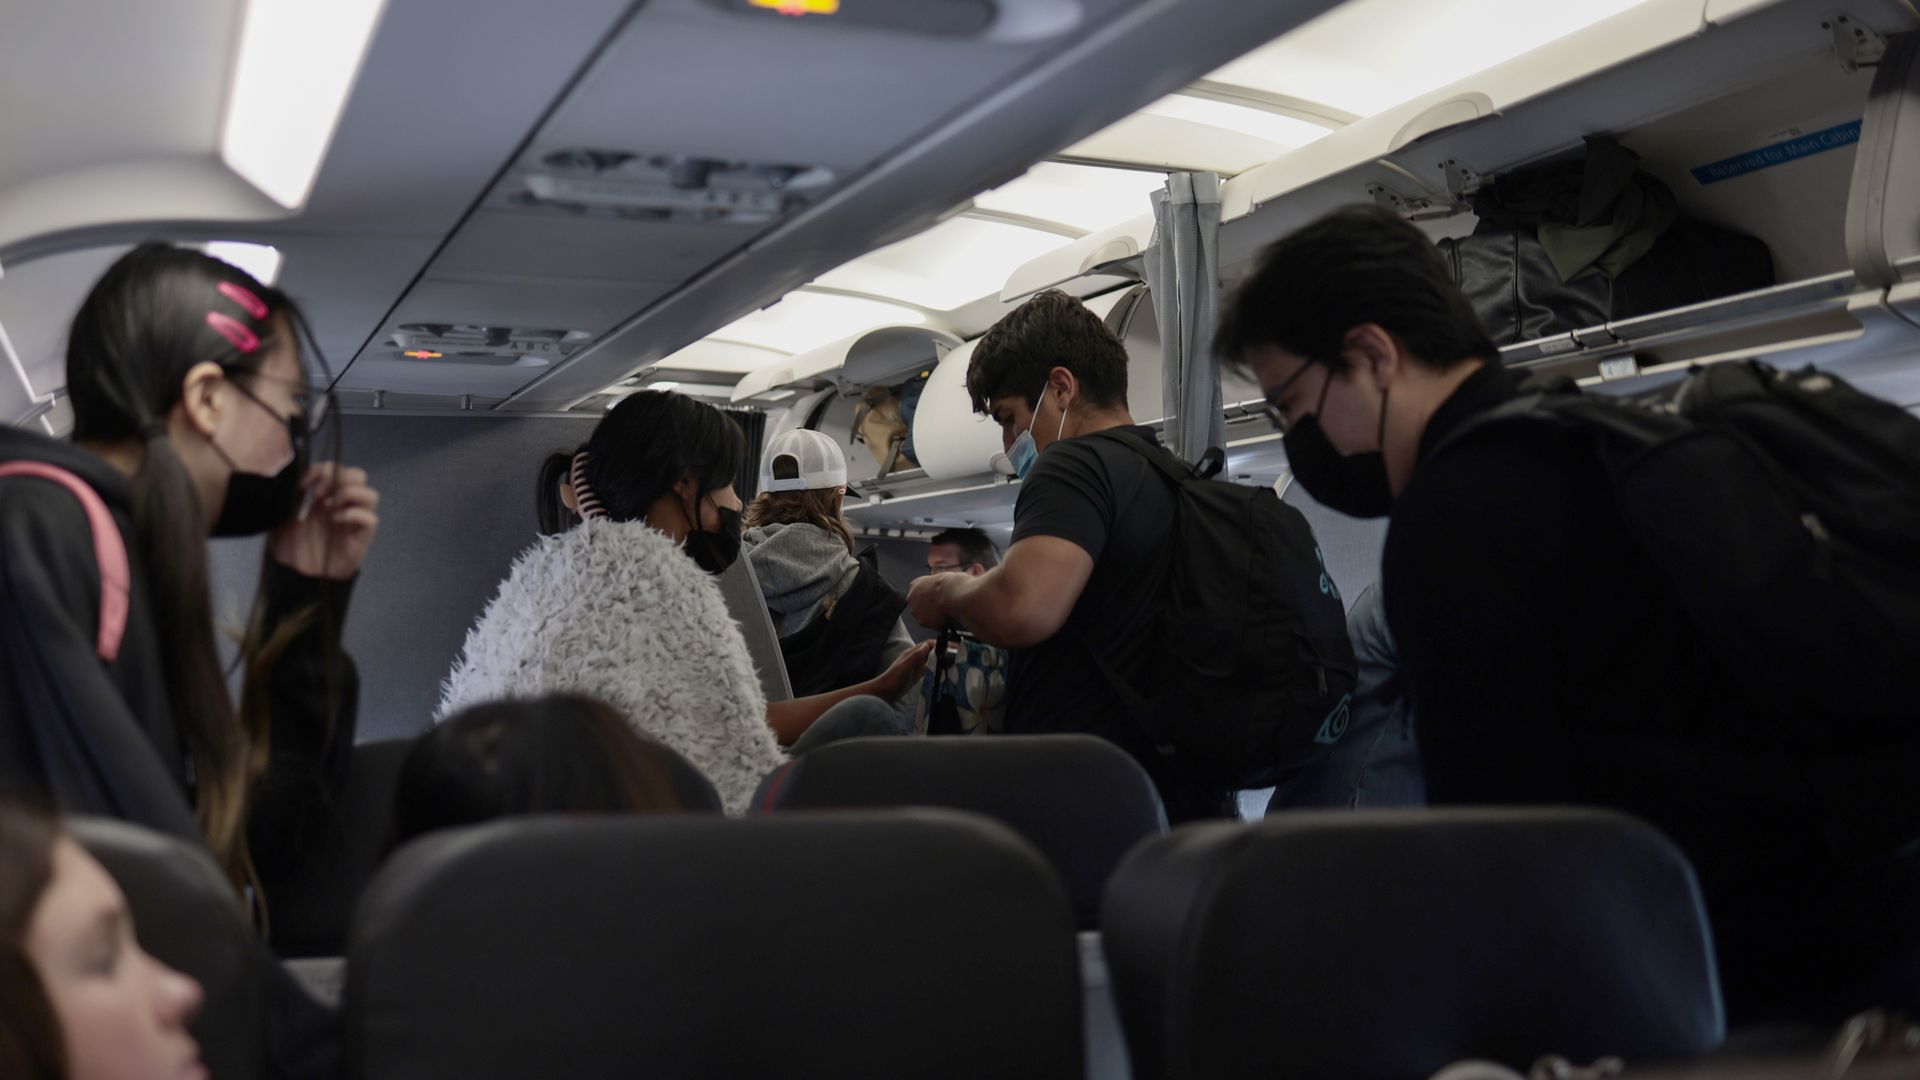 Passengers deplane from an airplane after landing at the Albuquerque International Sunport on November 24